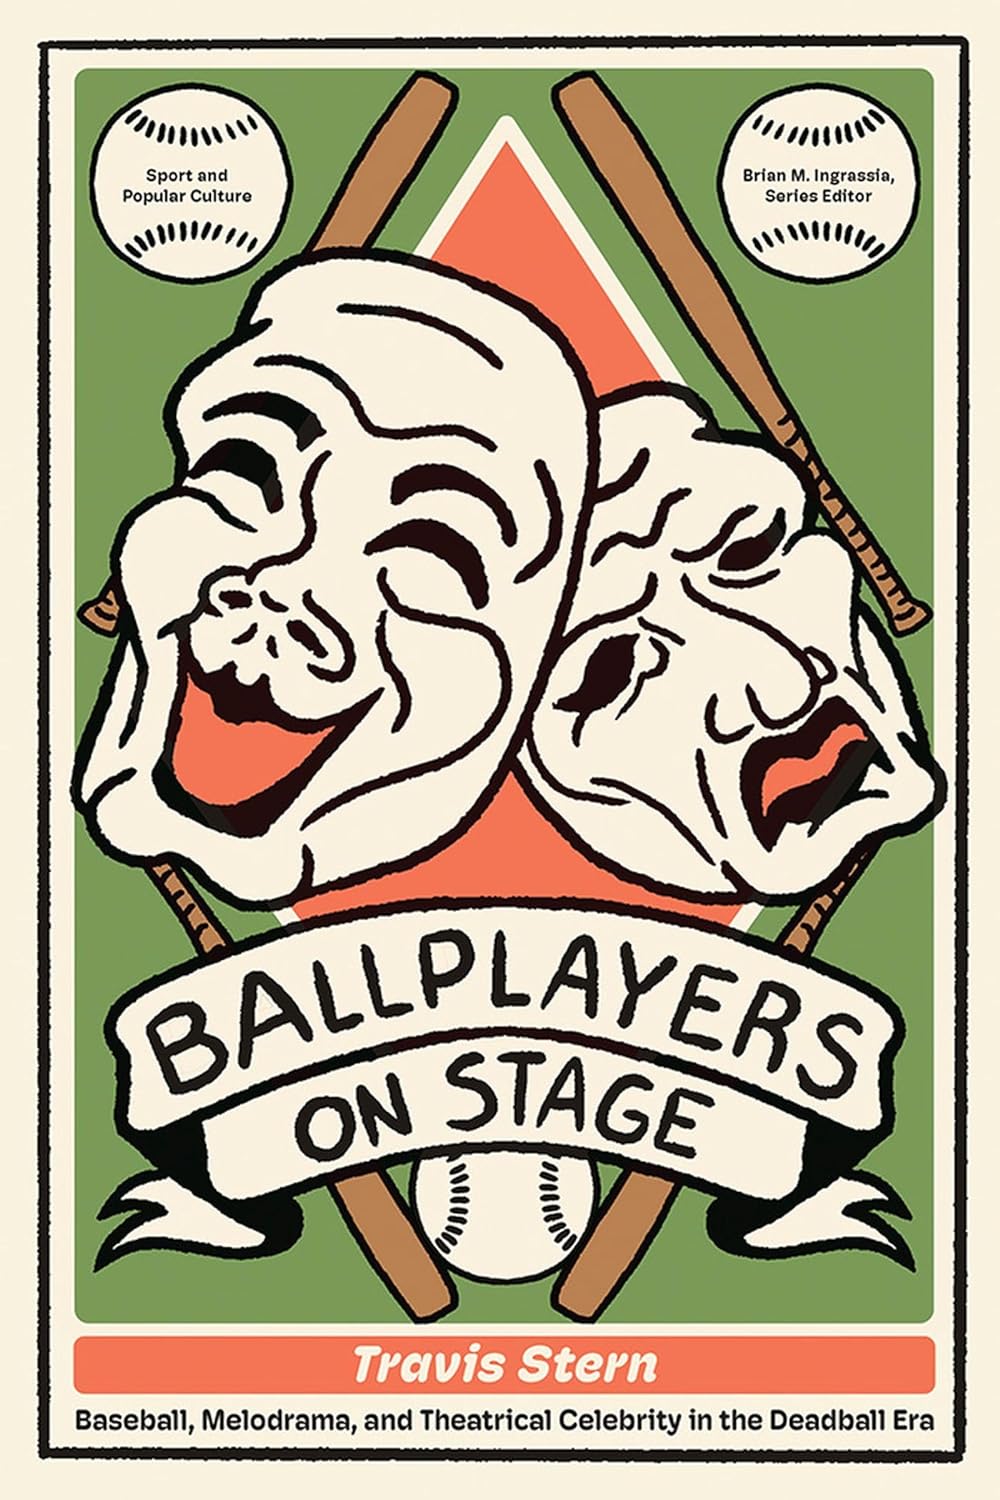 Ballplayers on Stage: Baseball, Melodrama, and Theatrical Celebrity in the Deadball Era by Travis Stern